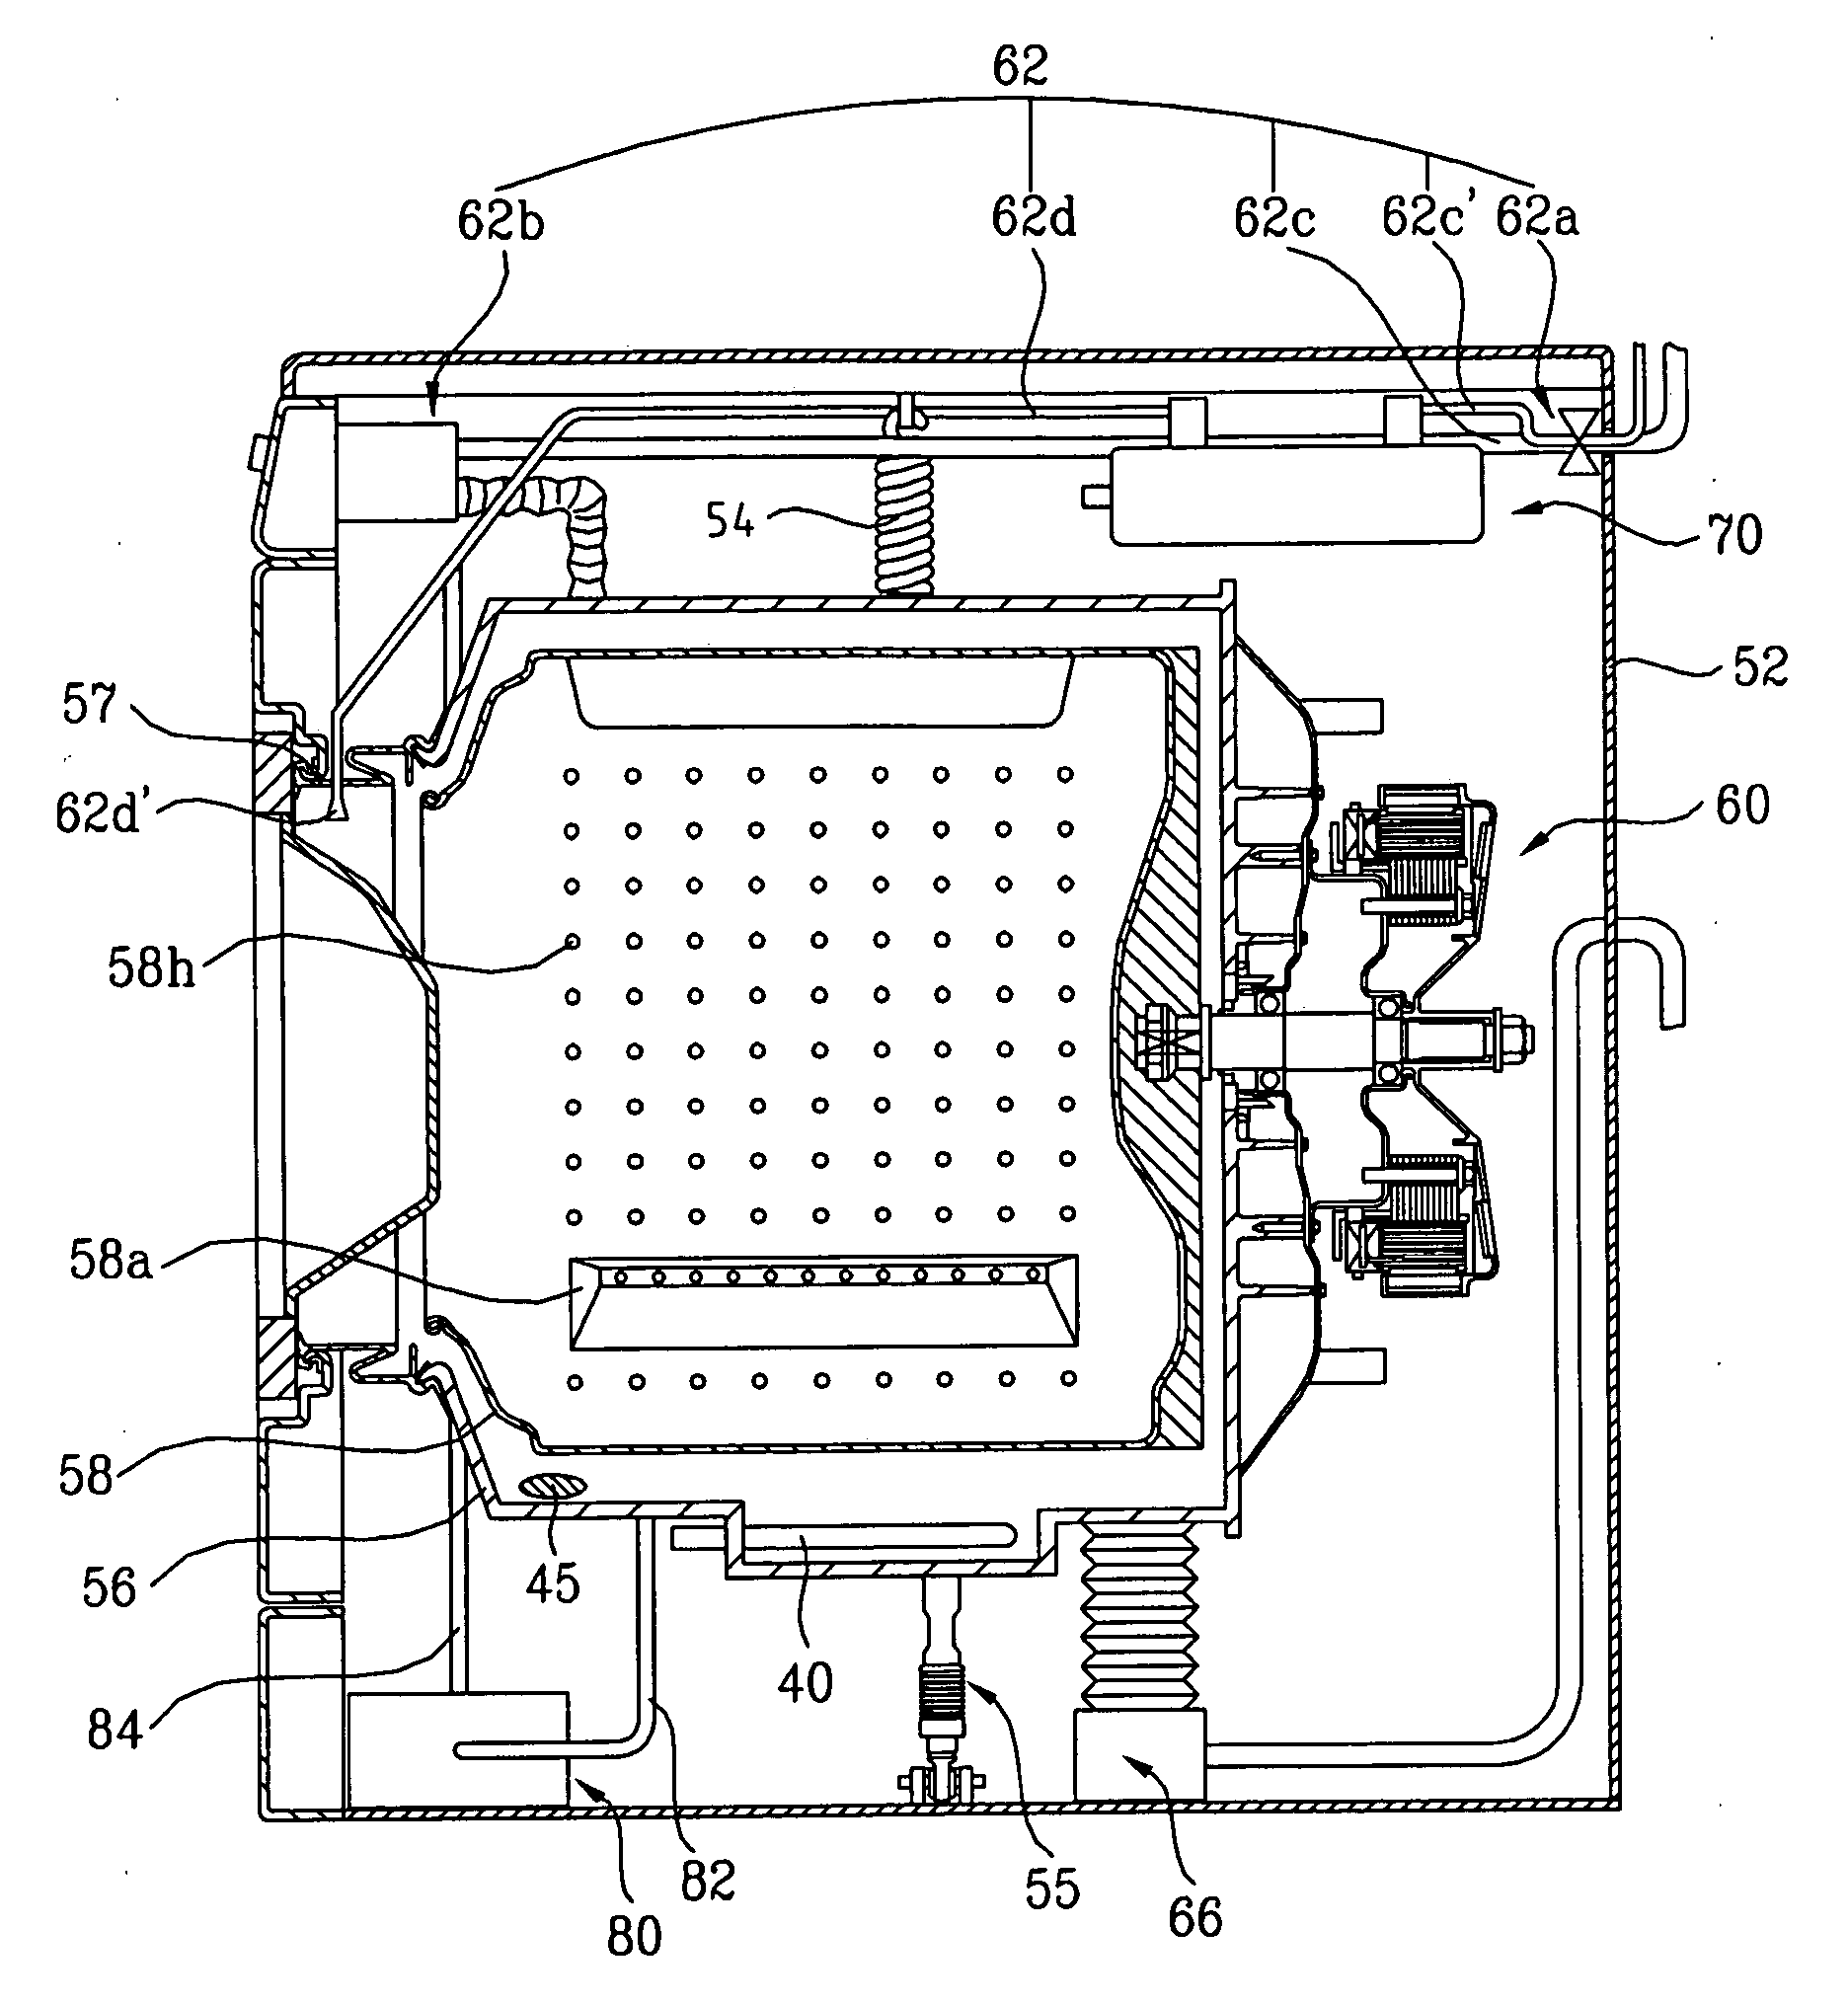 Controlling method of a laundry machine